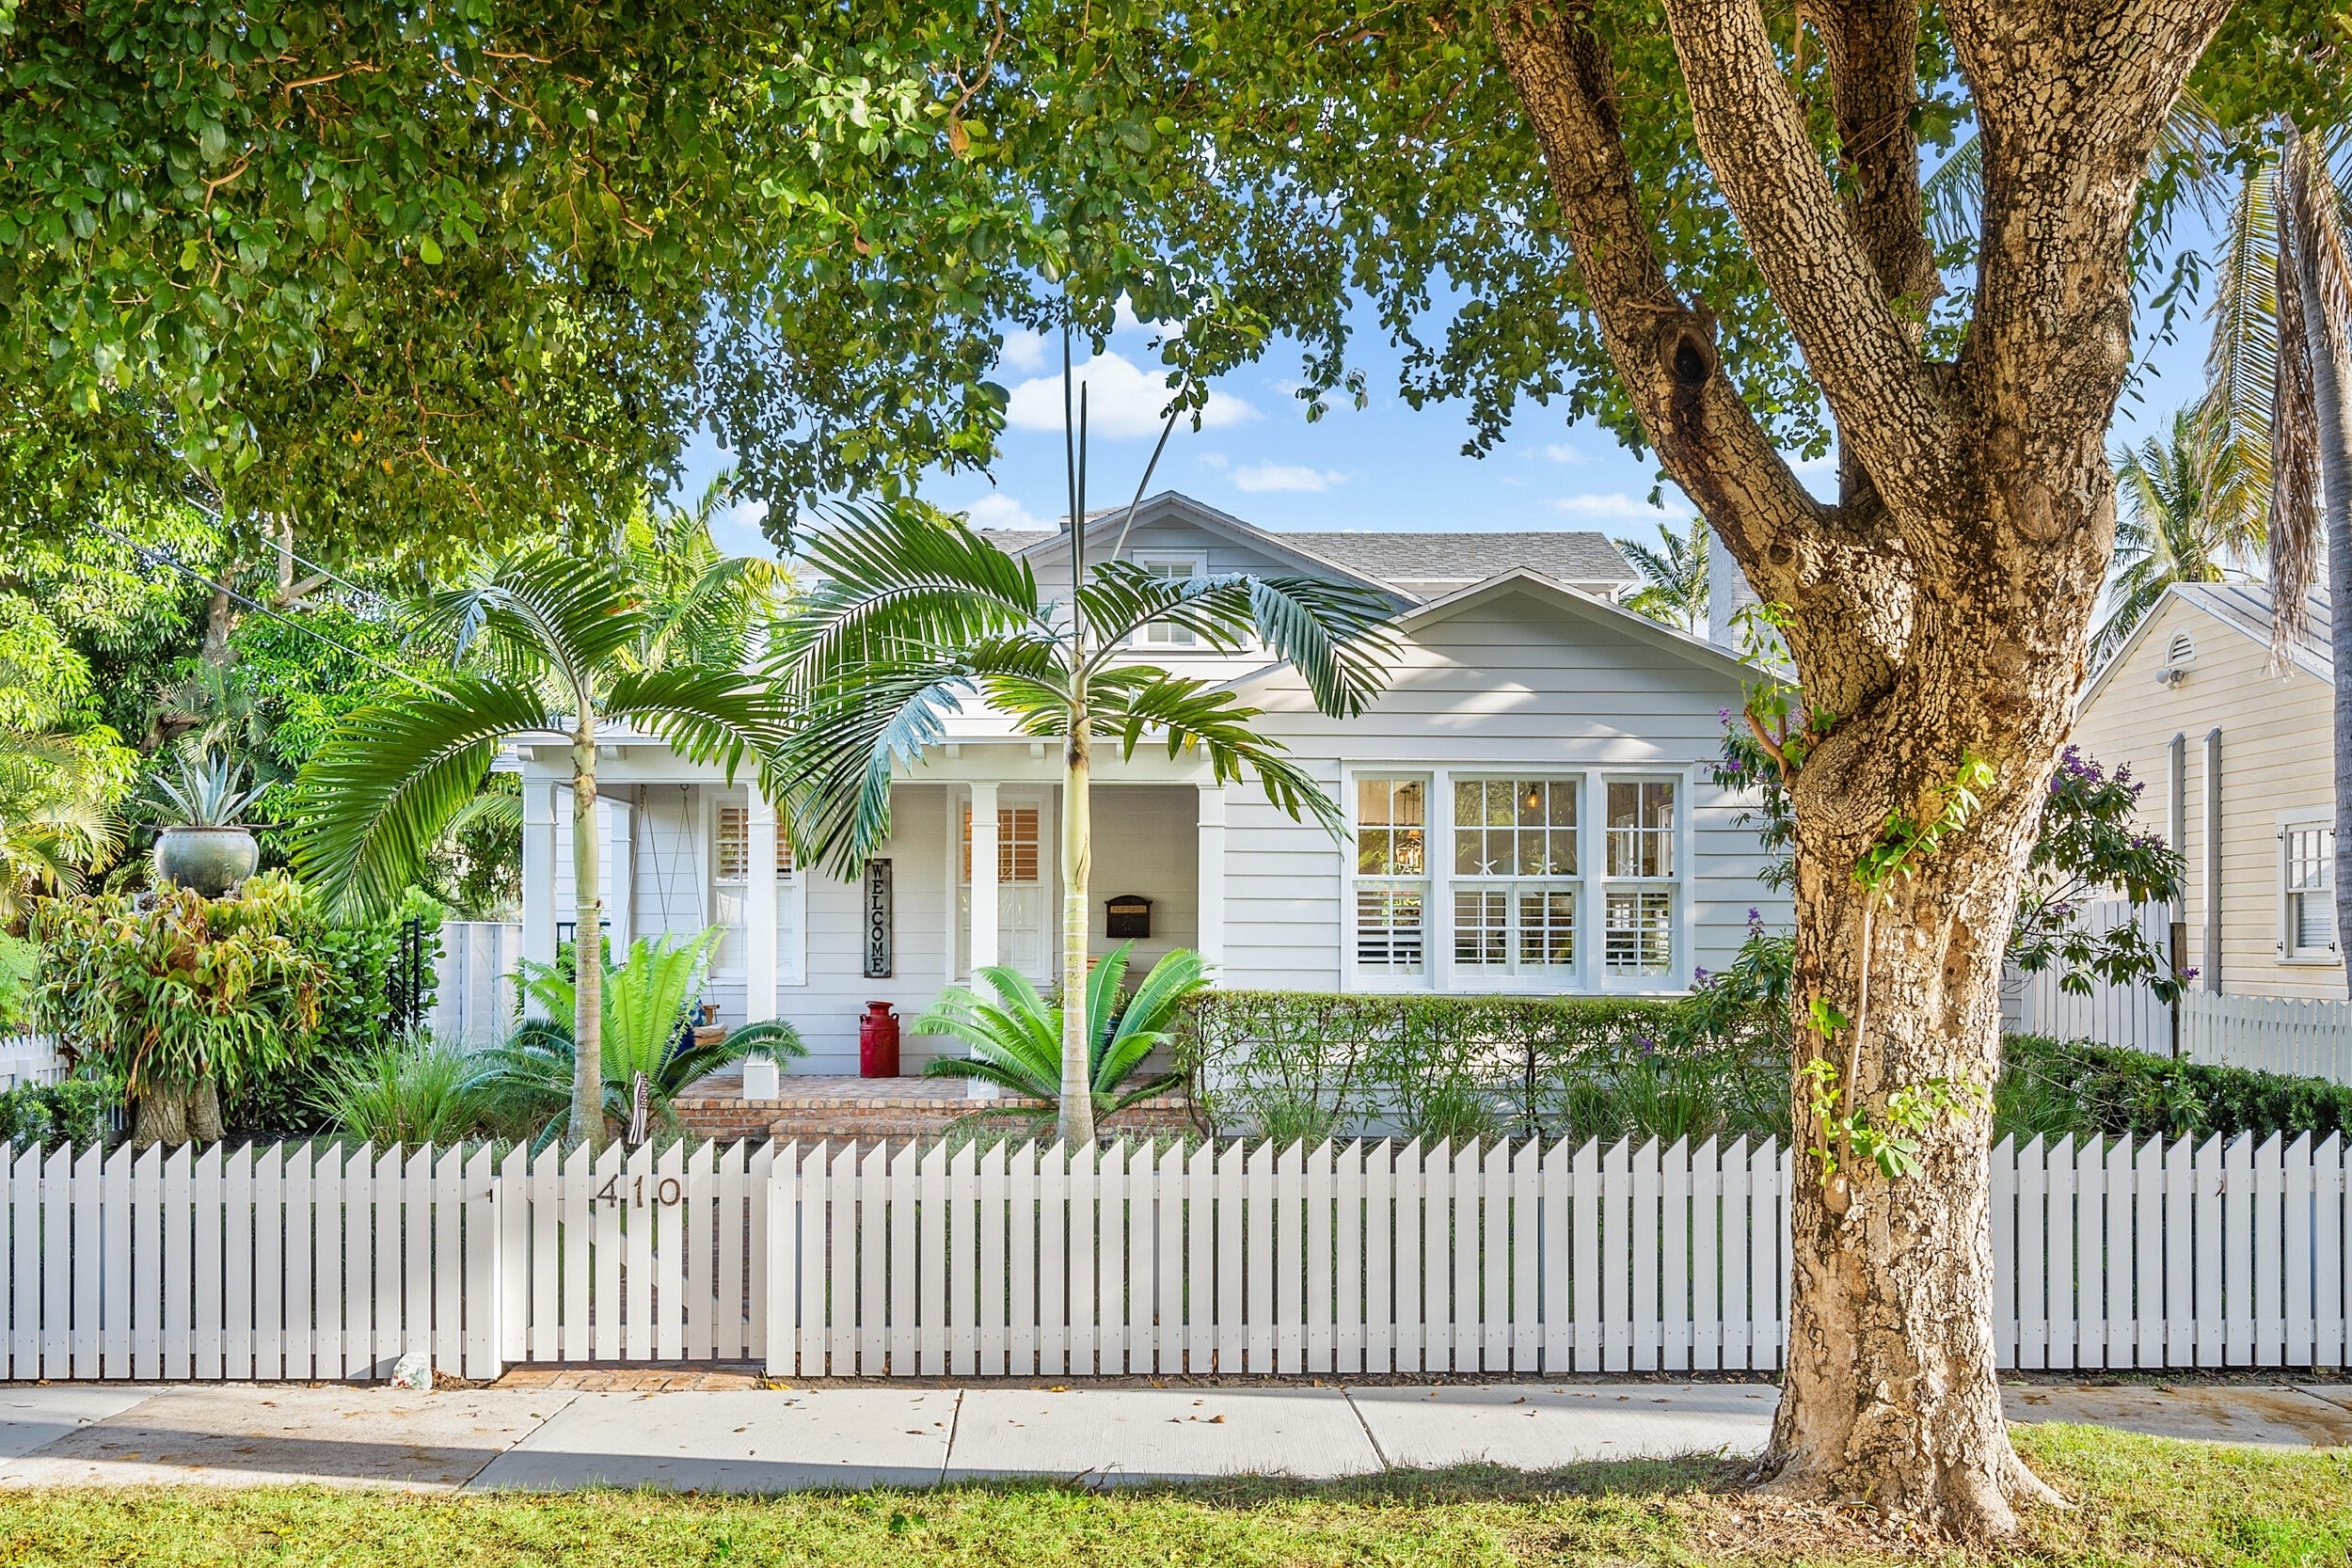 Single Family Home for Sale at Old Northwood Historic District, West Palm Beach, FL 33407